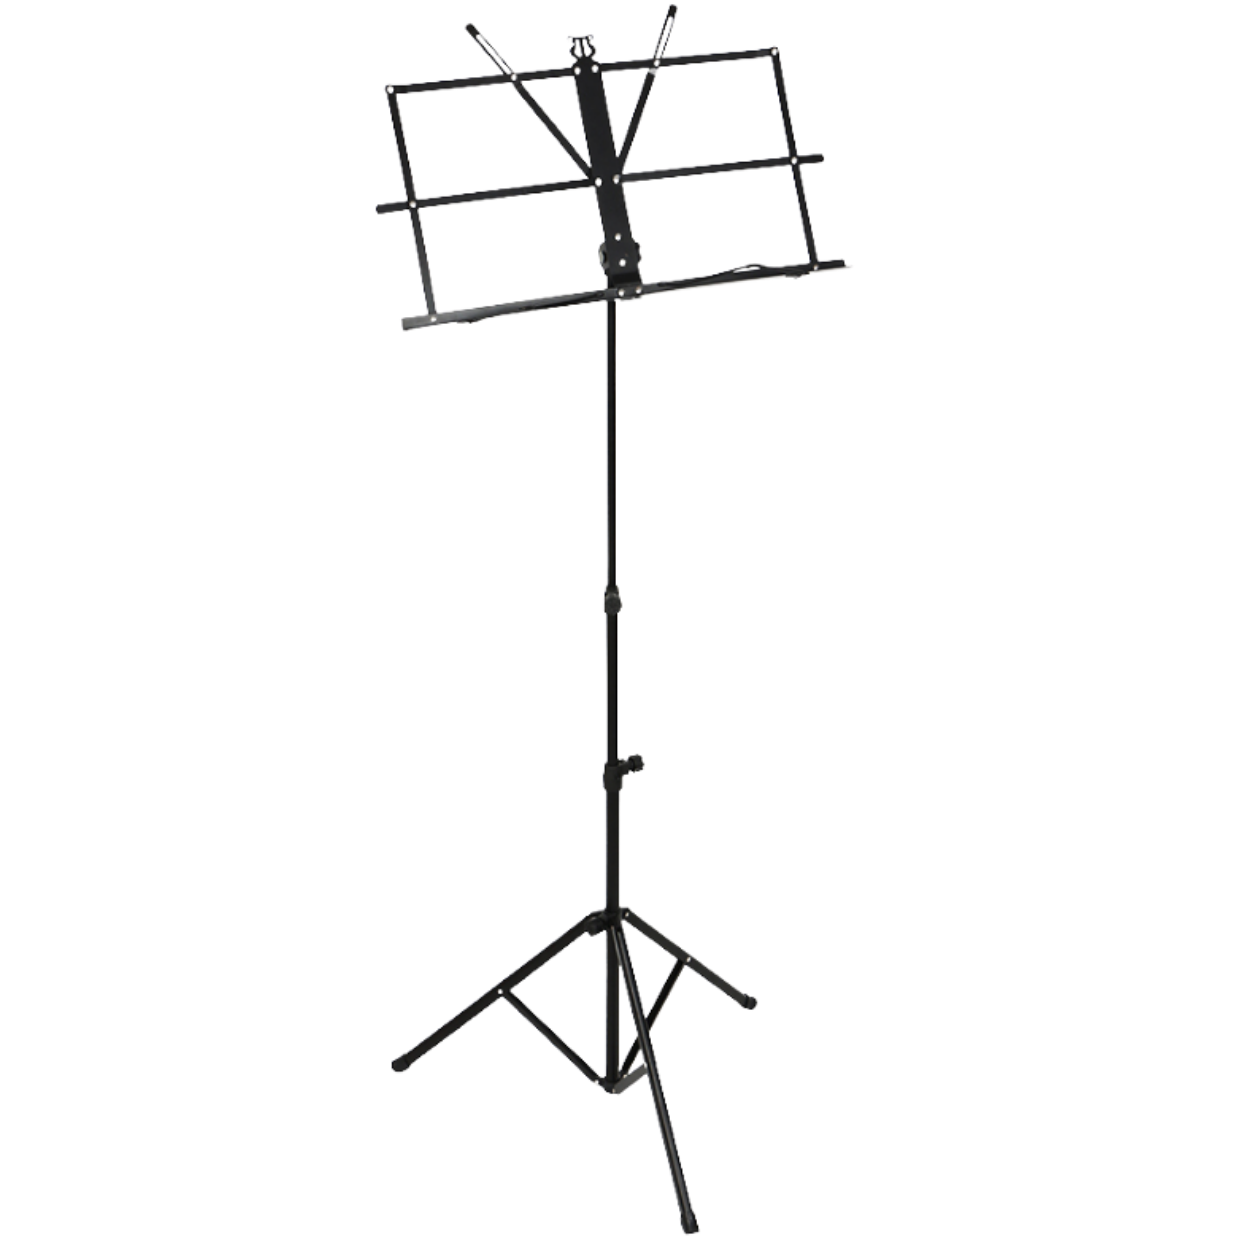 NEOWOOD P011 FOLDABLE MUSIC STAND, NEOWOOD, STAND, neowood-accessories-neo-p011, ZOSO MUSIC SDN BHD